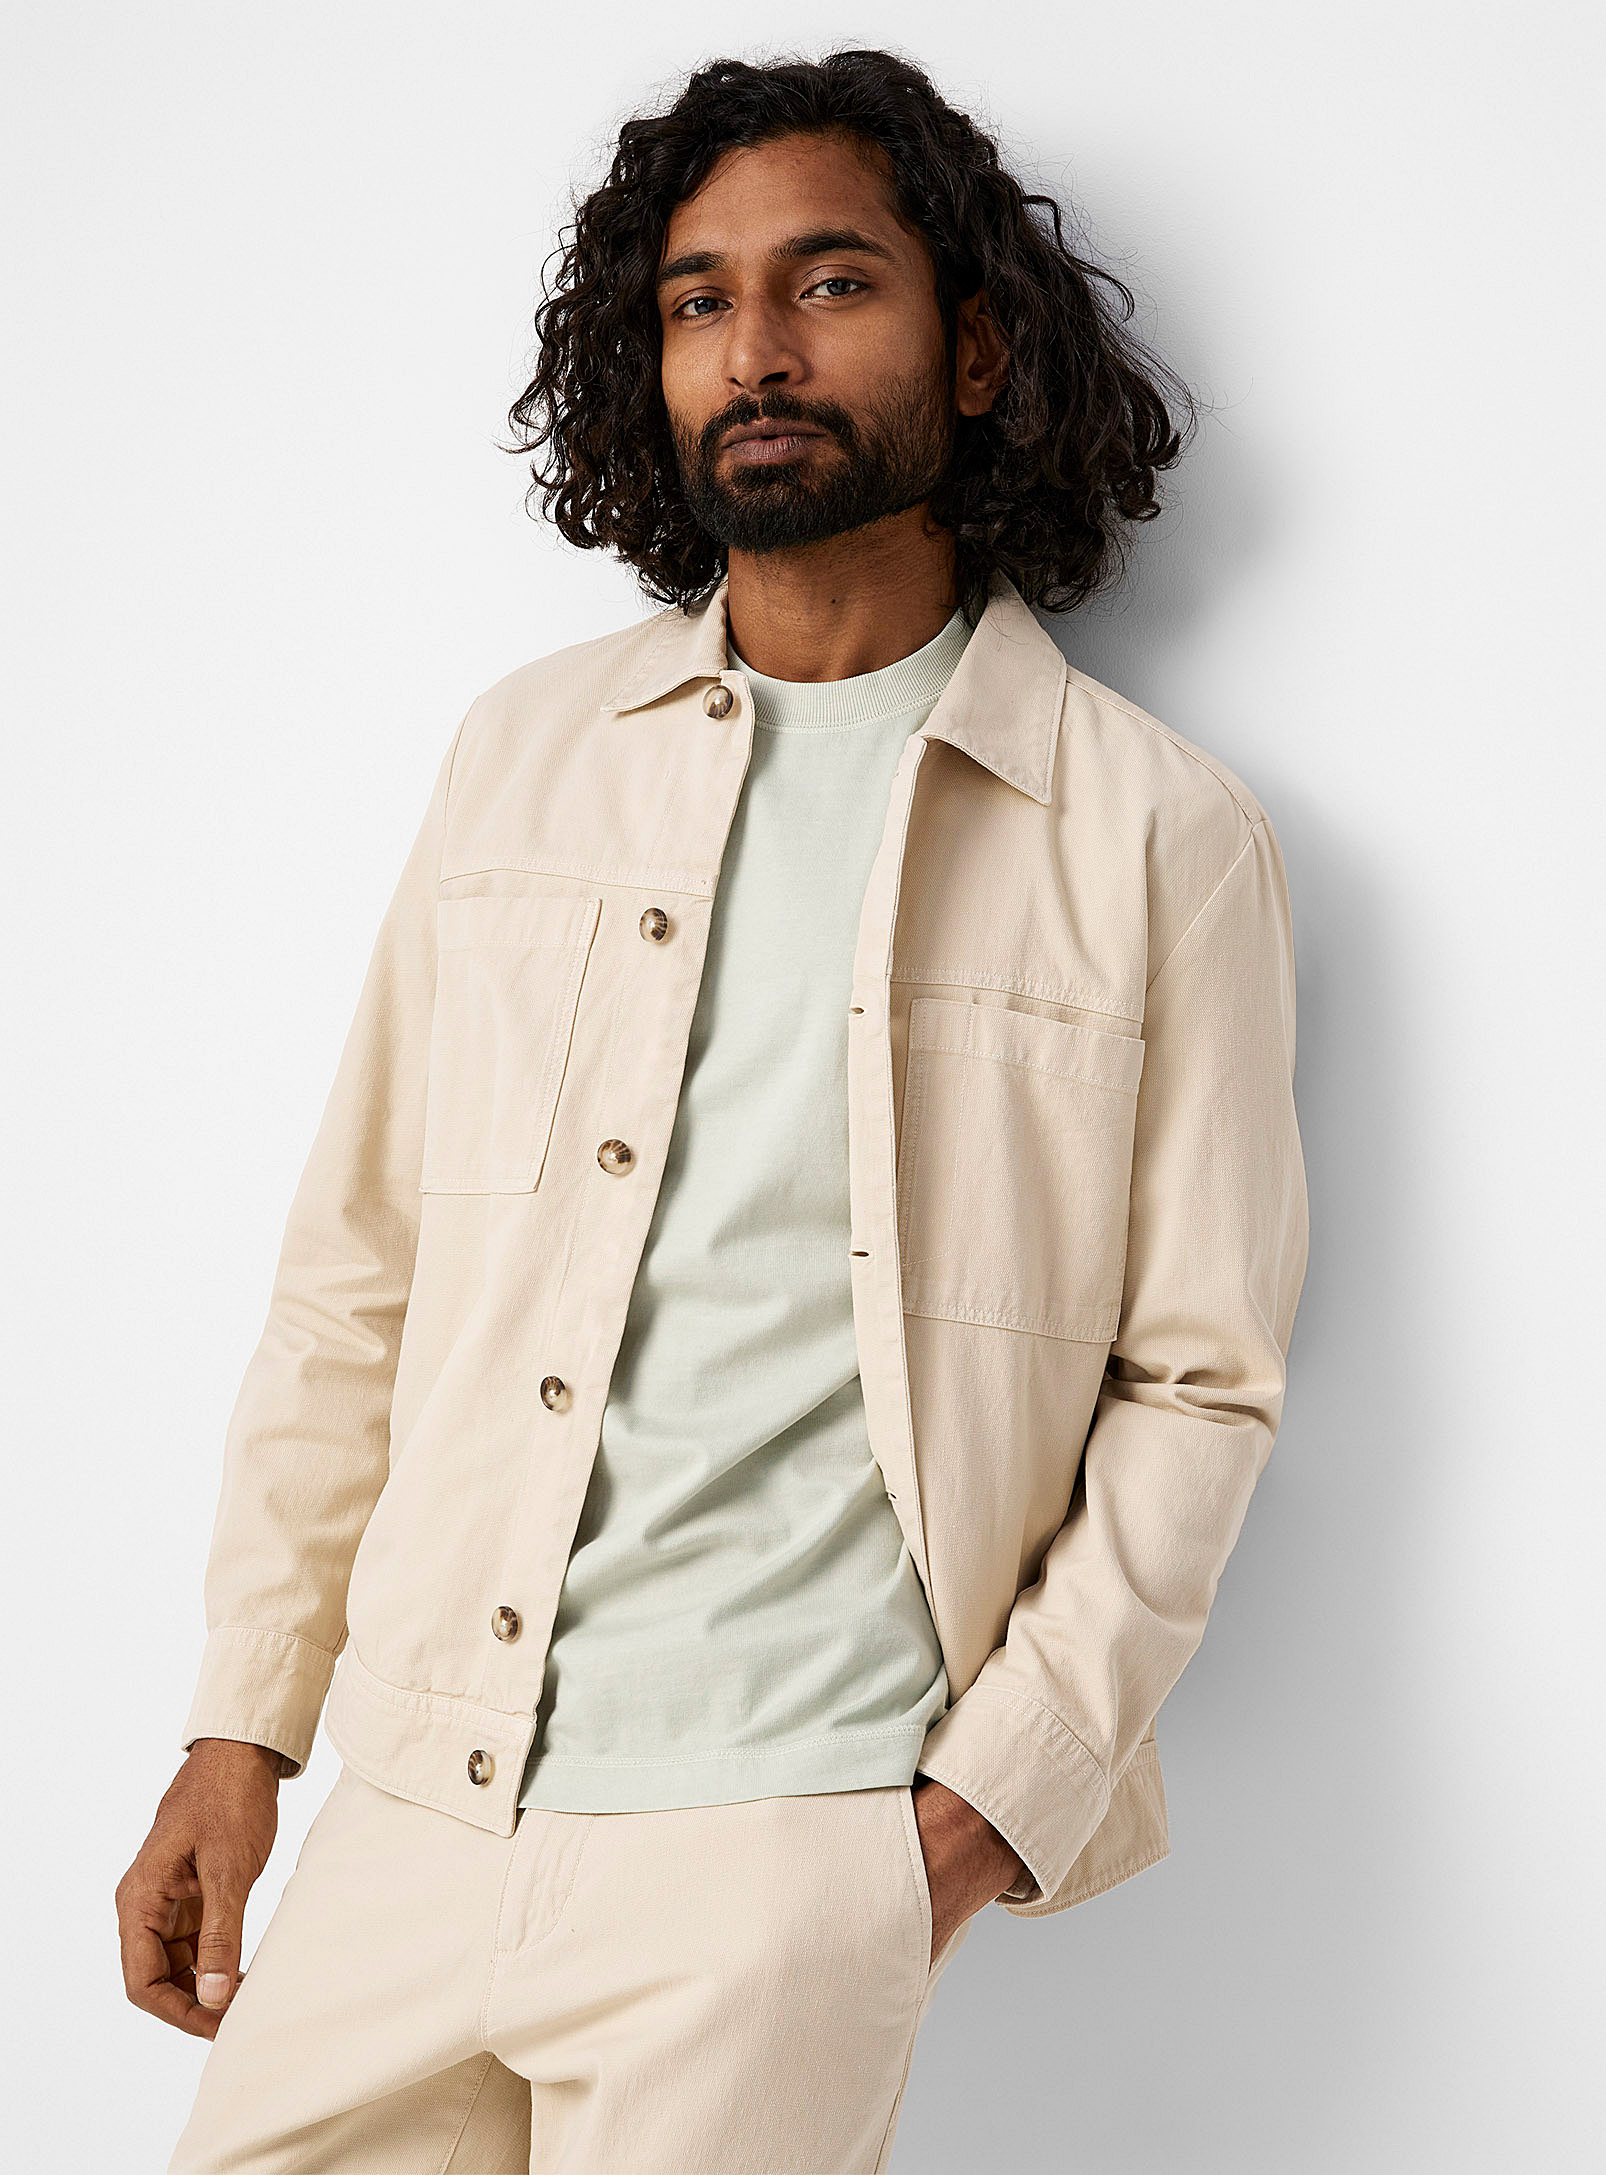 Marc O'Polo - Men's Beige organic cotton and linen twill jacket